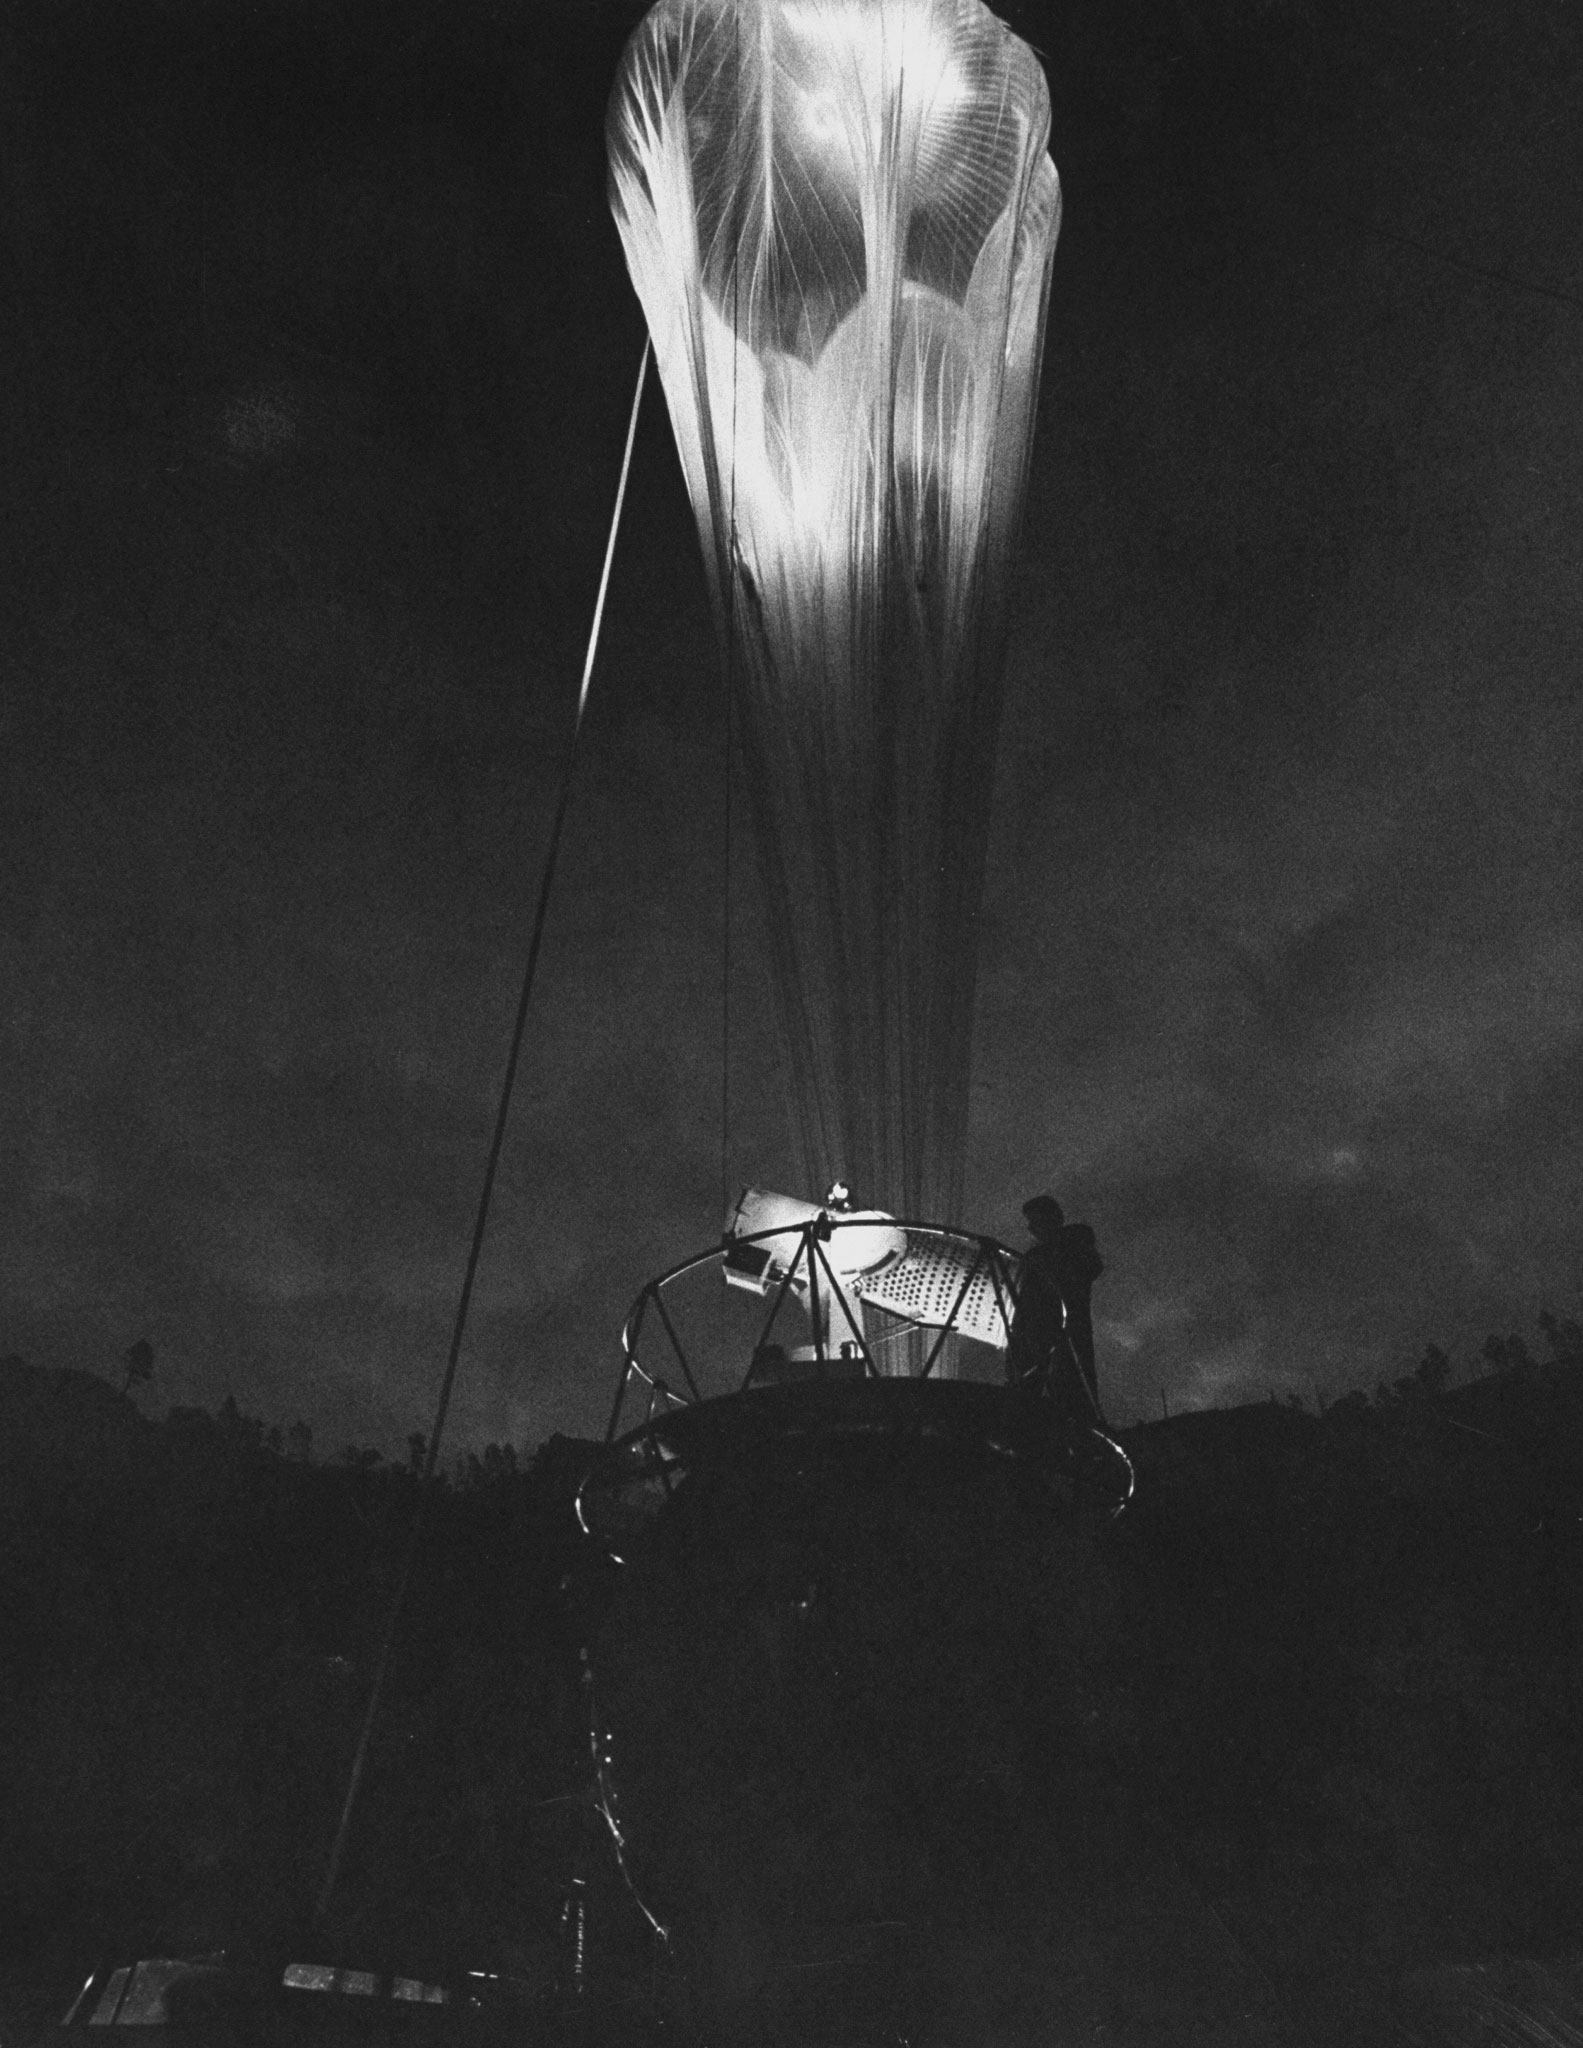 Balloon being inflated in preparation for high-altitude ascent, 1959.